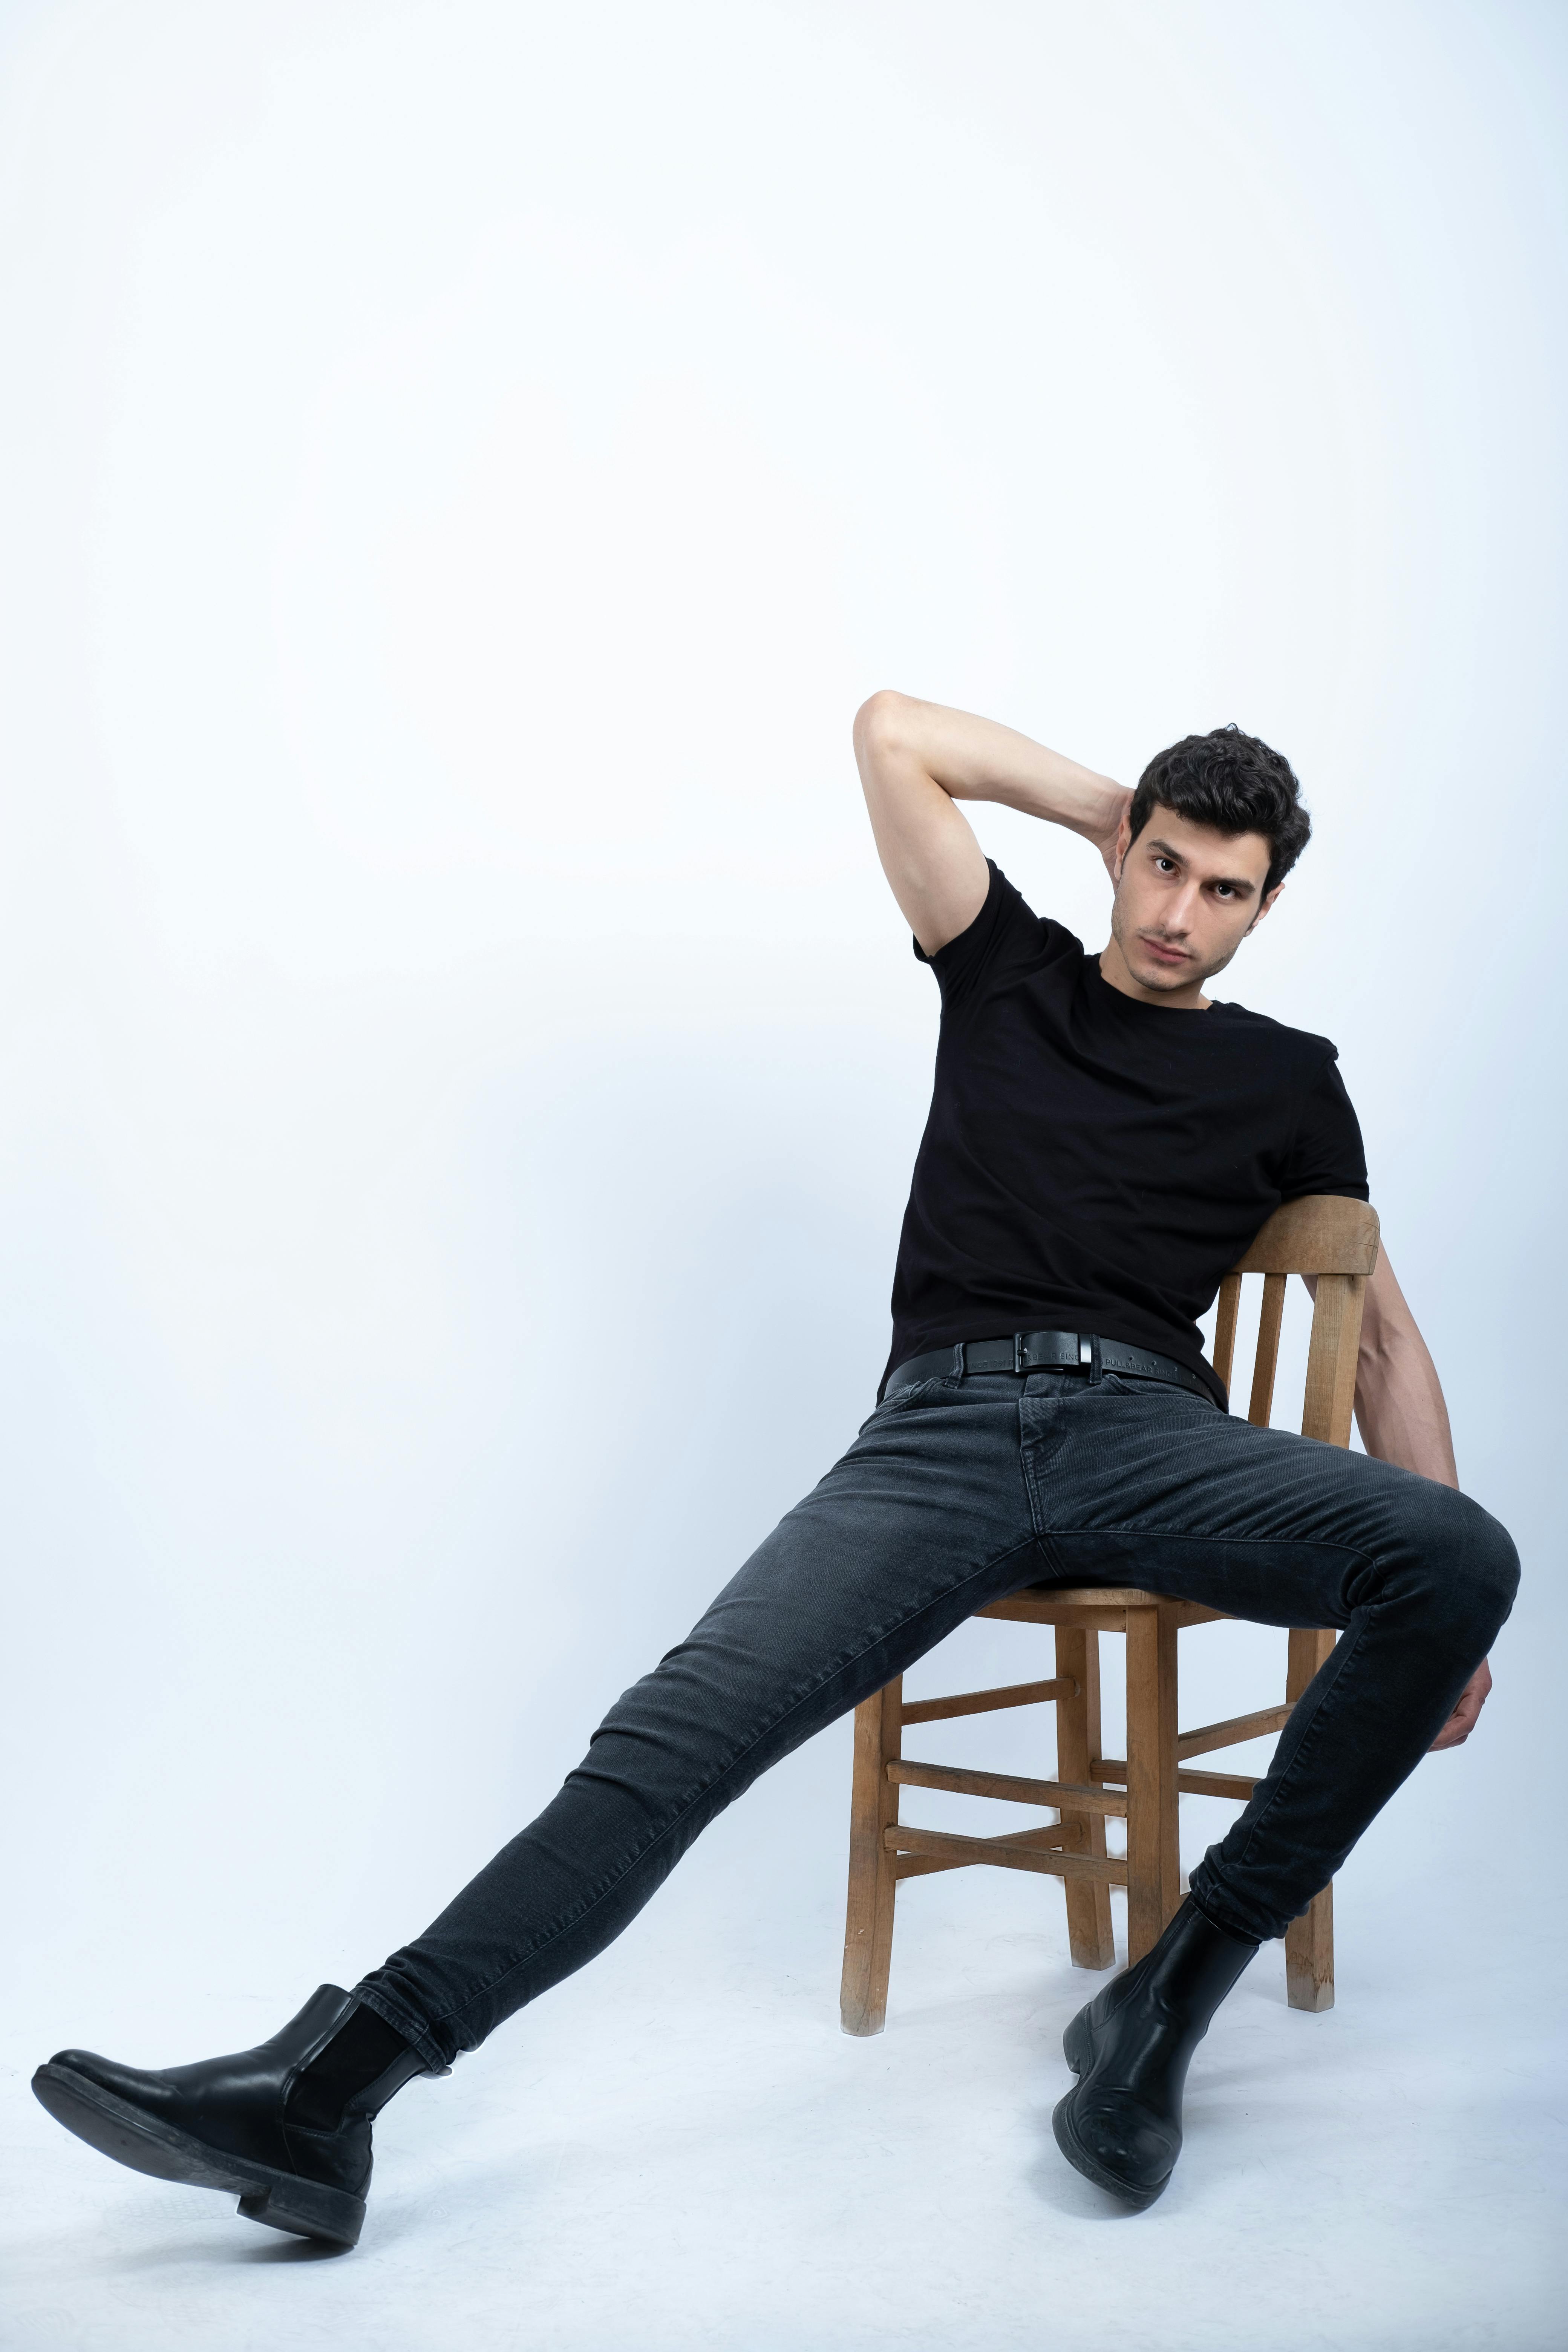 Free Photos - Dapper Male Model Poses In A Chair | FreePixel.com